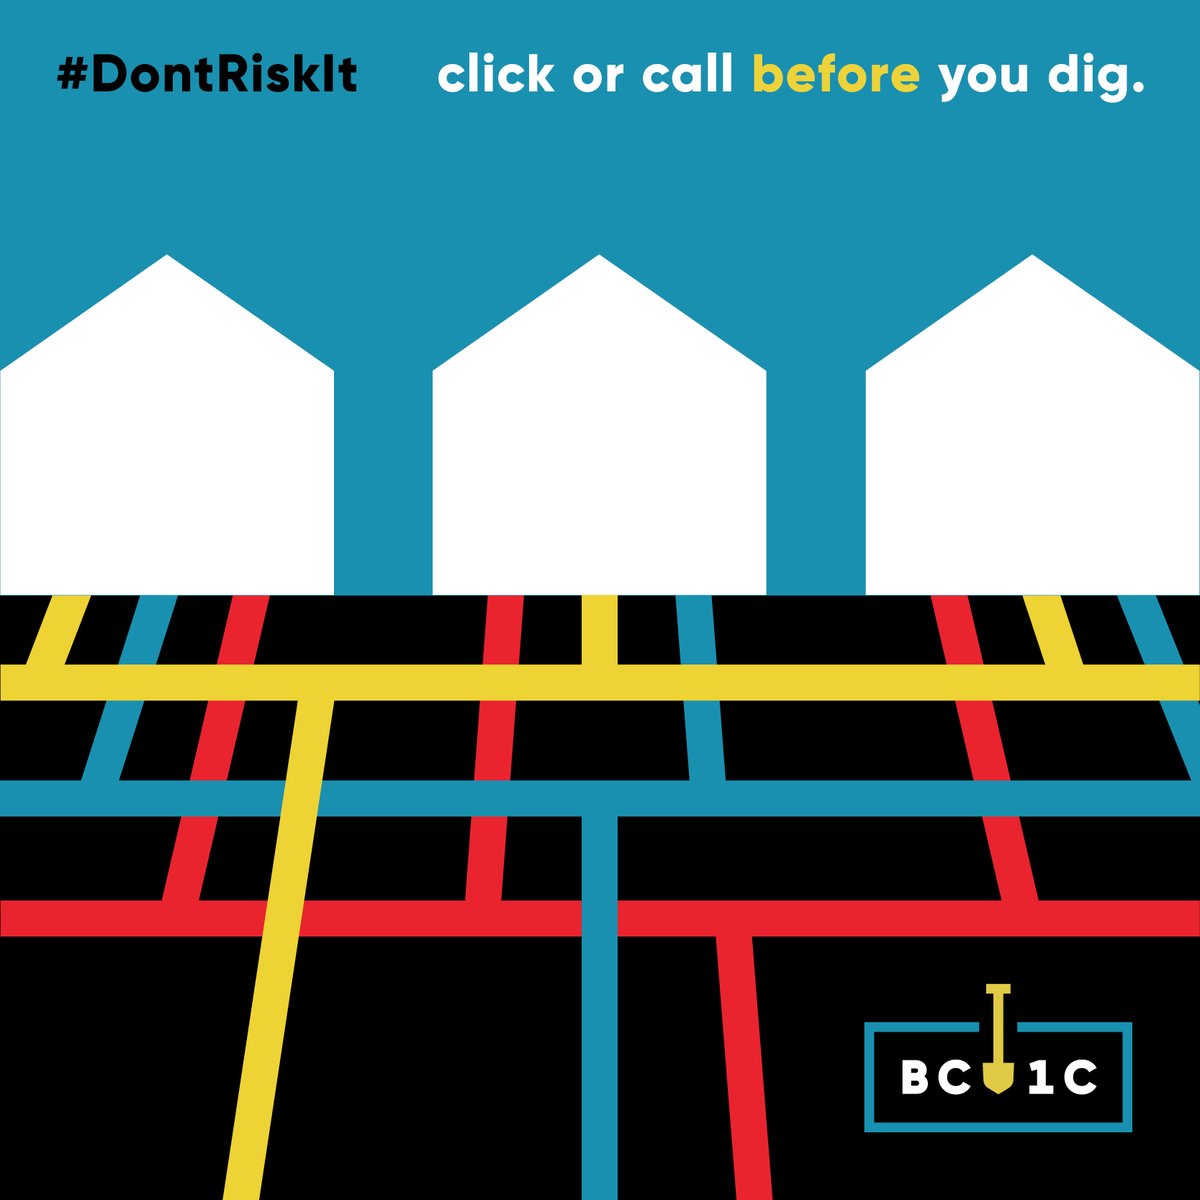 Before you break ground on your DIY yard projects, or start tackling a construction project requiring excavation, be sure to contact BC 1 Call so their members can let you know what's below! #DigSafe hubs.li/Q02ngzXg0